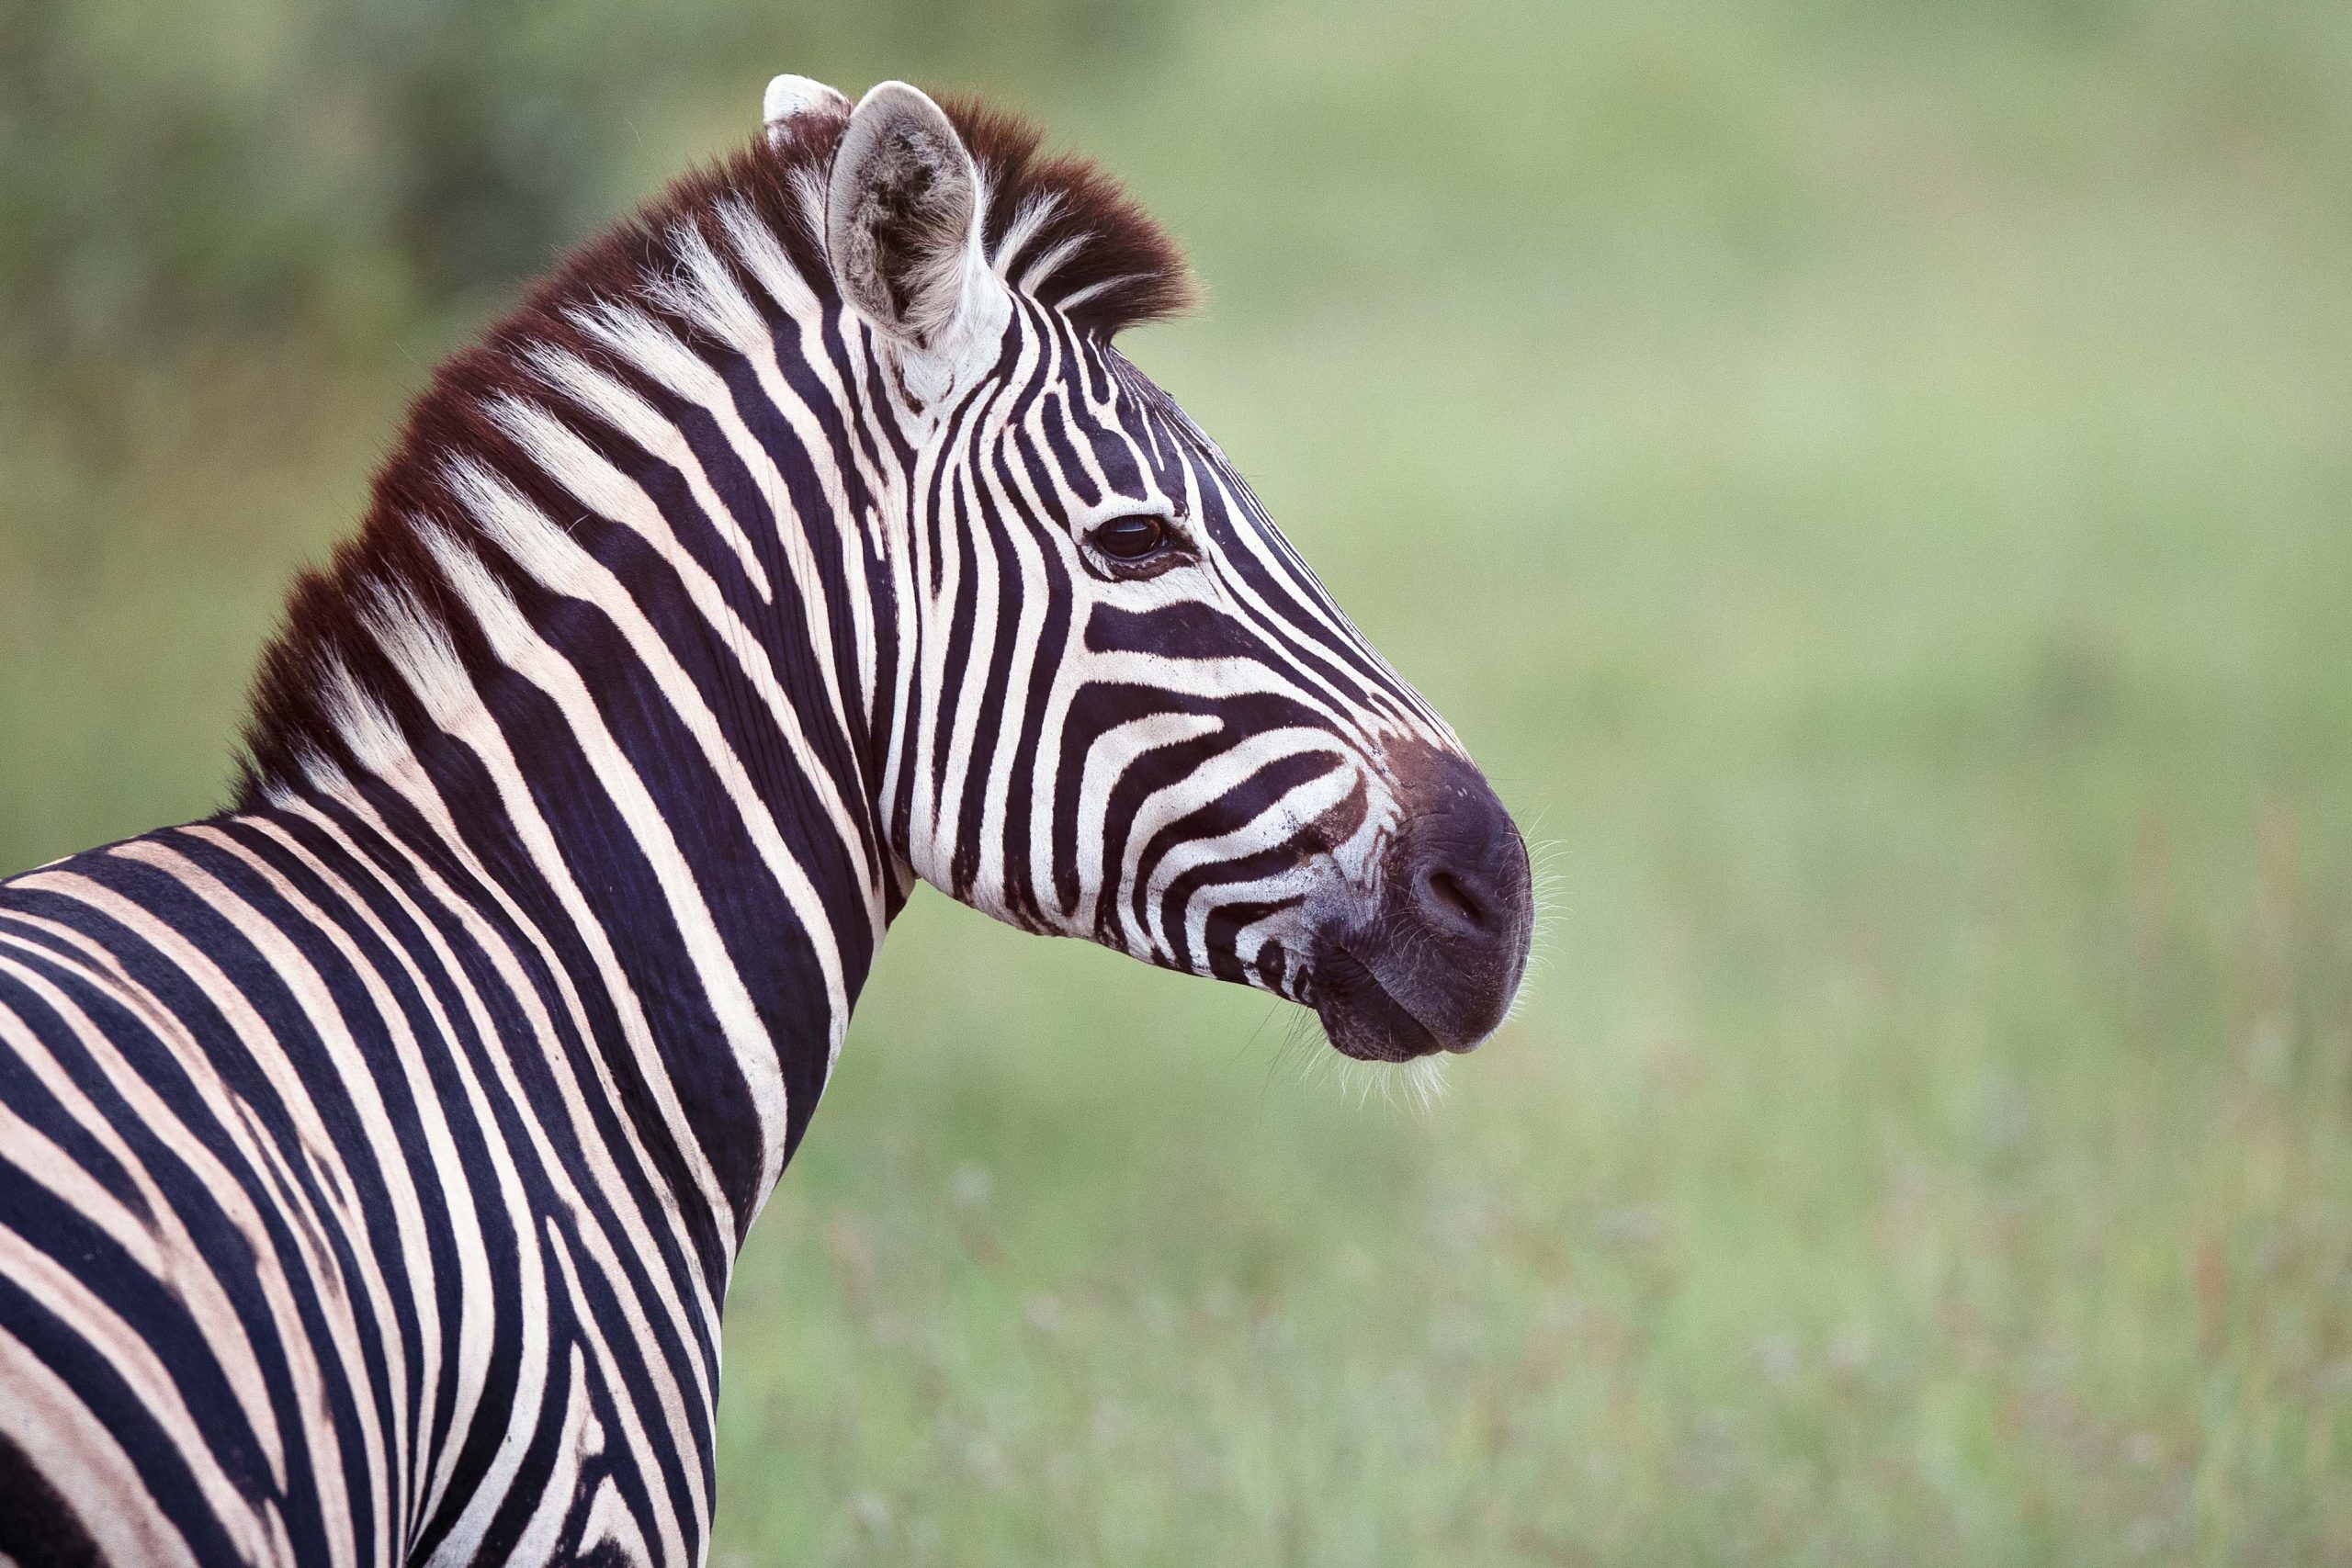 a side view photo of a zebra